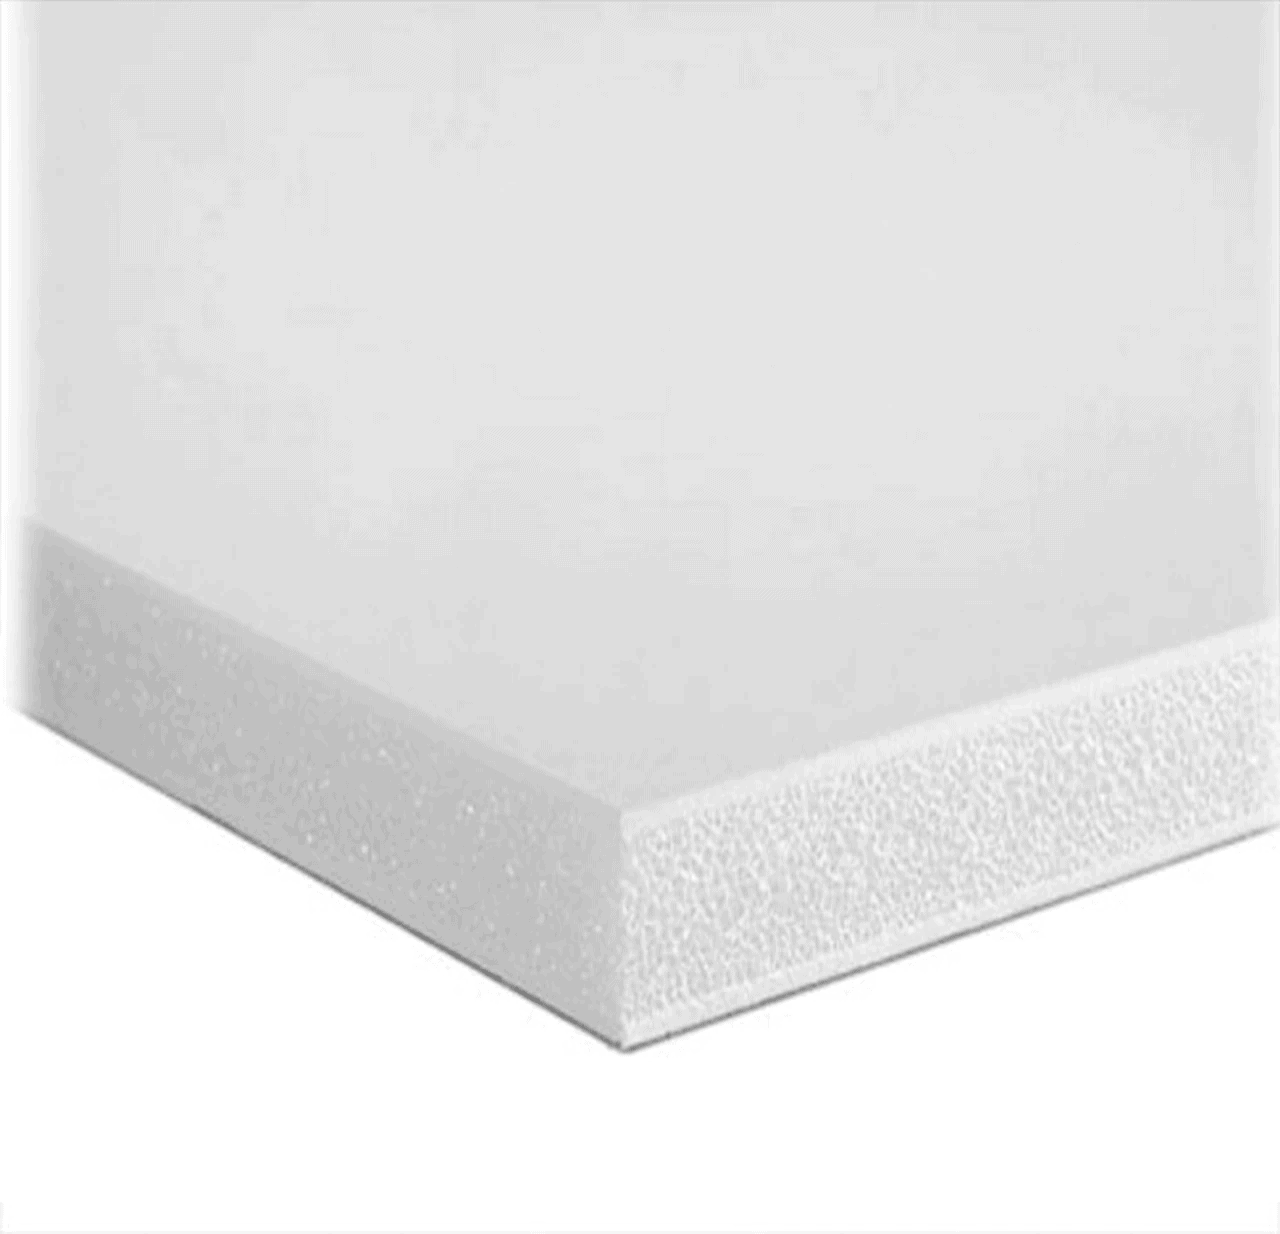 White 3/16” Foam Board - 25 Pack with Multiple Sizes